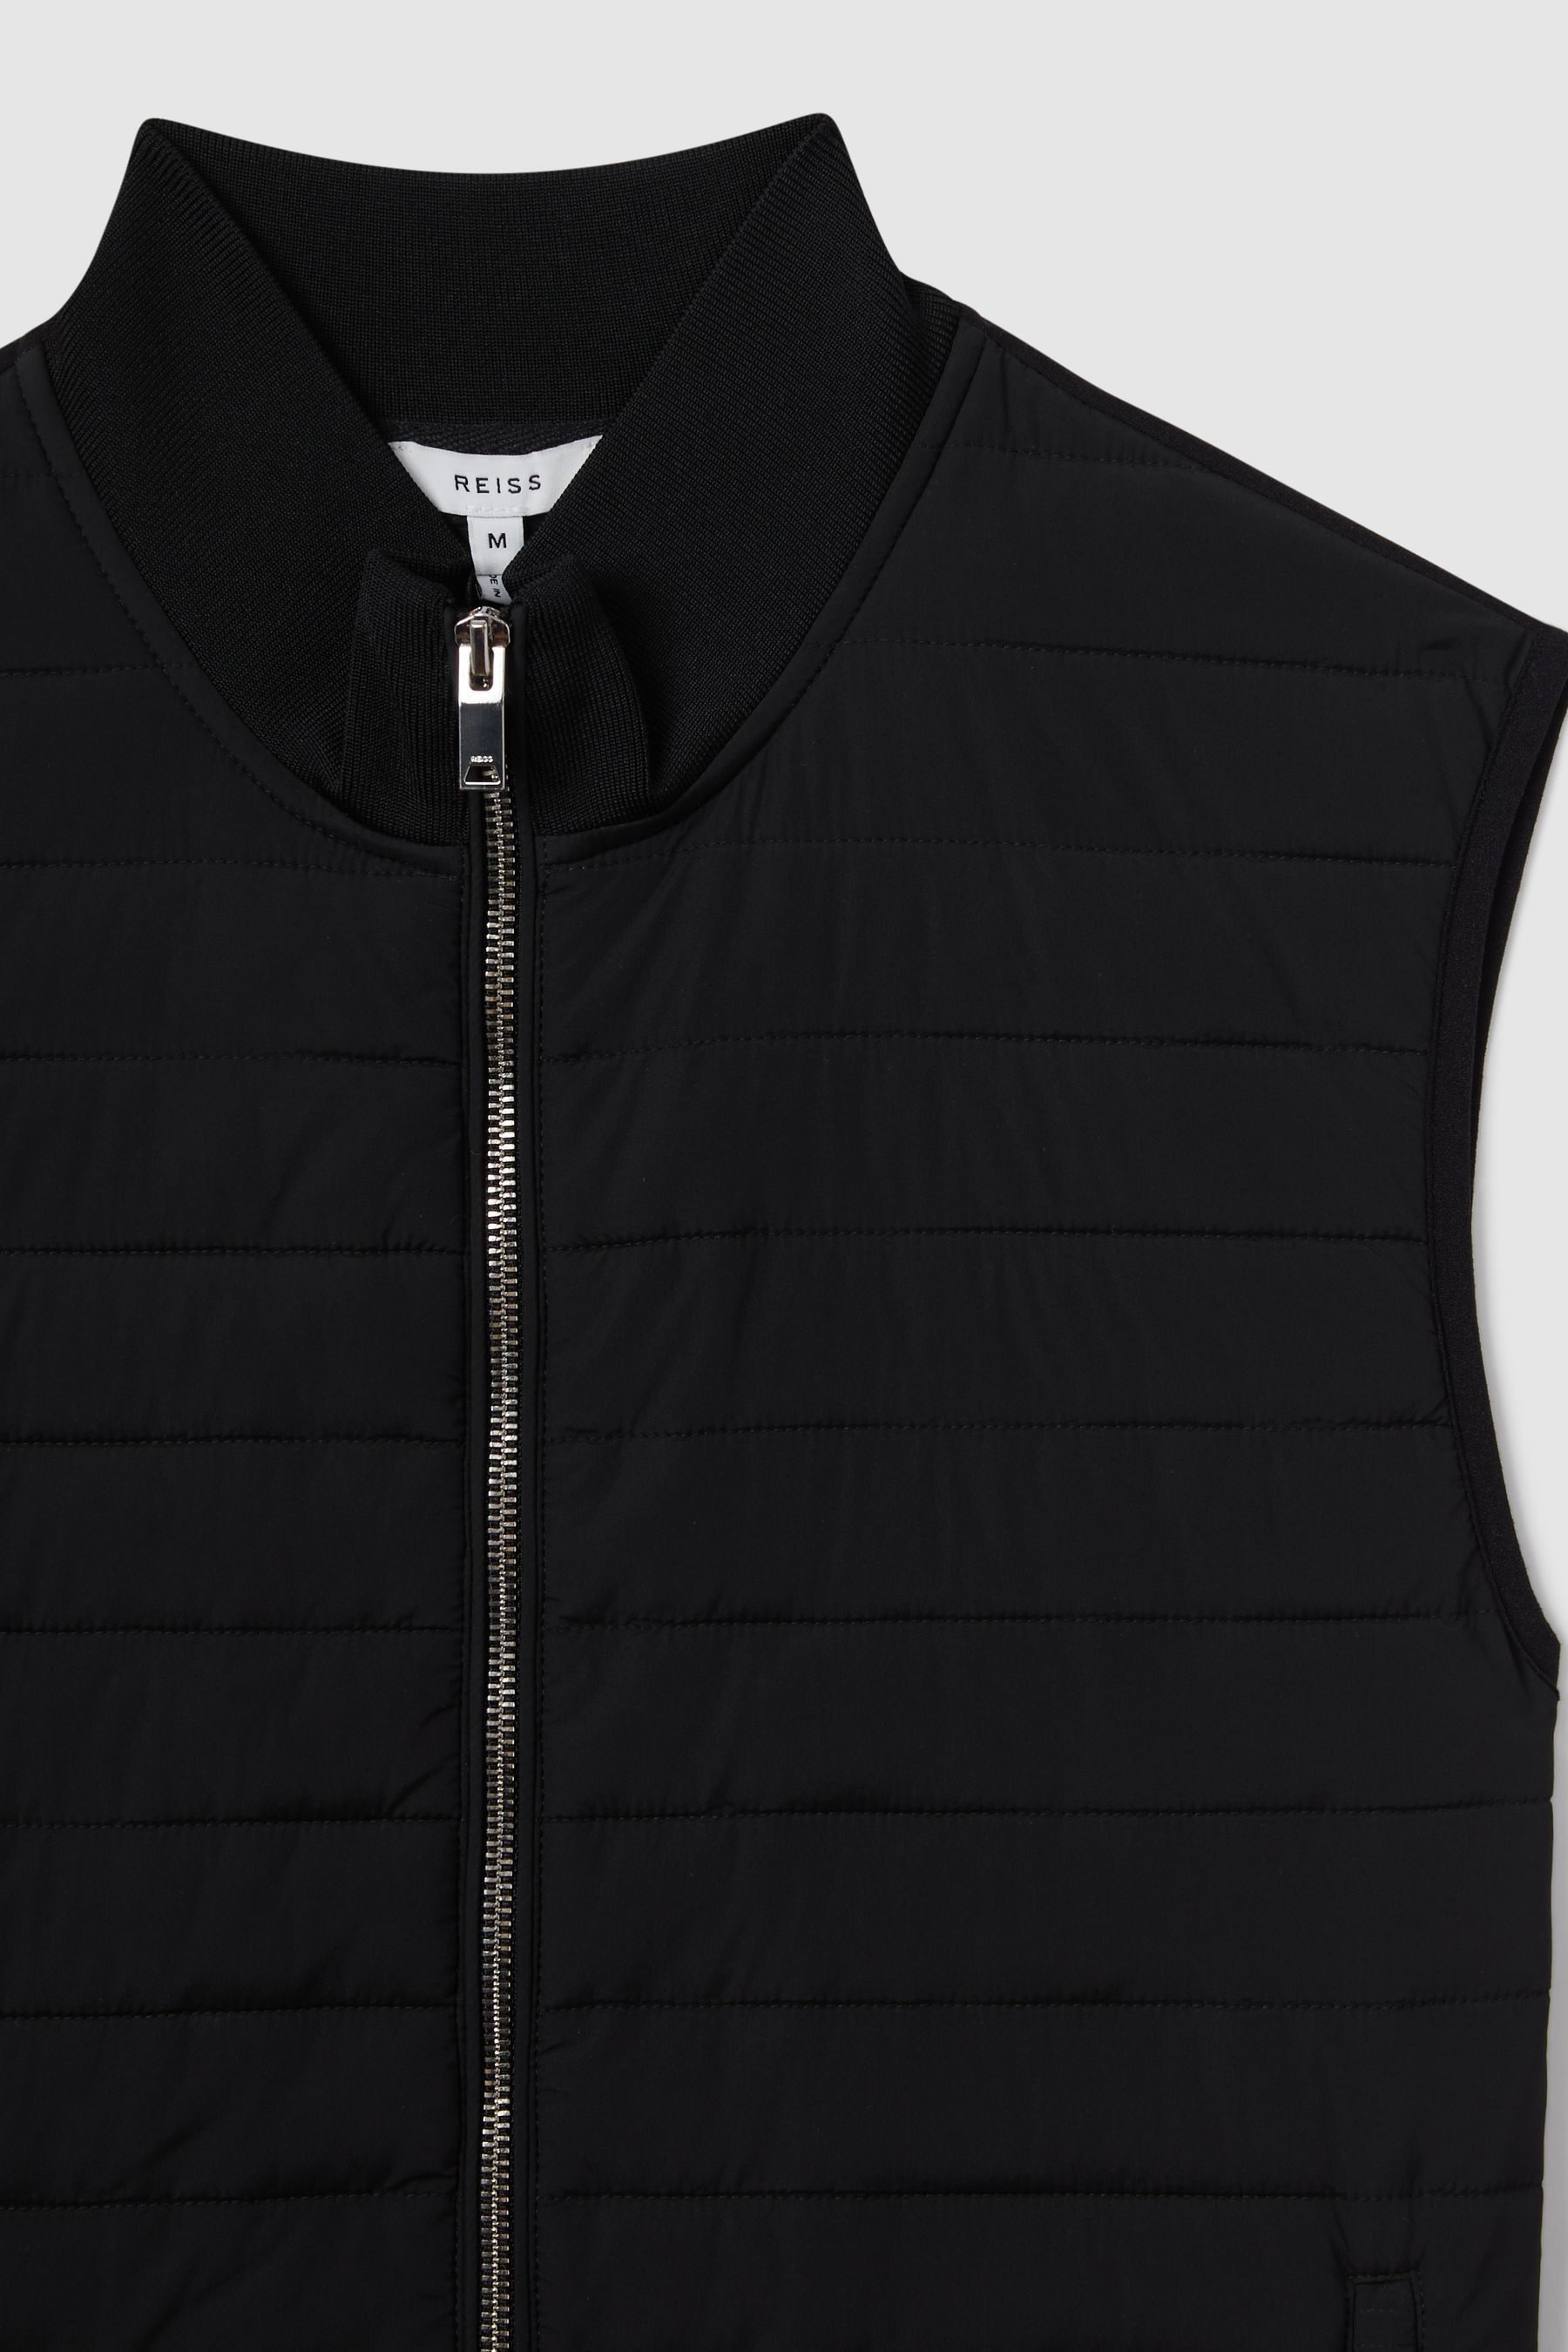 Buy Reiss Black Pluto Hybrid Quilt and Knit Zip-Through Gilet from the ...